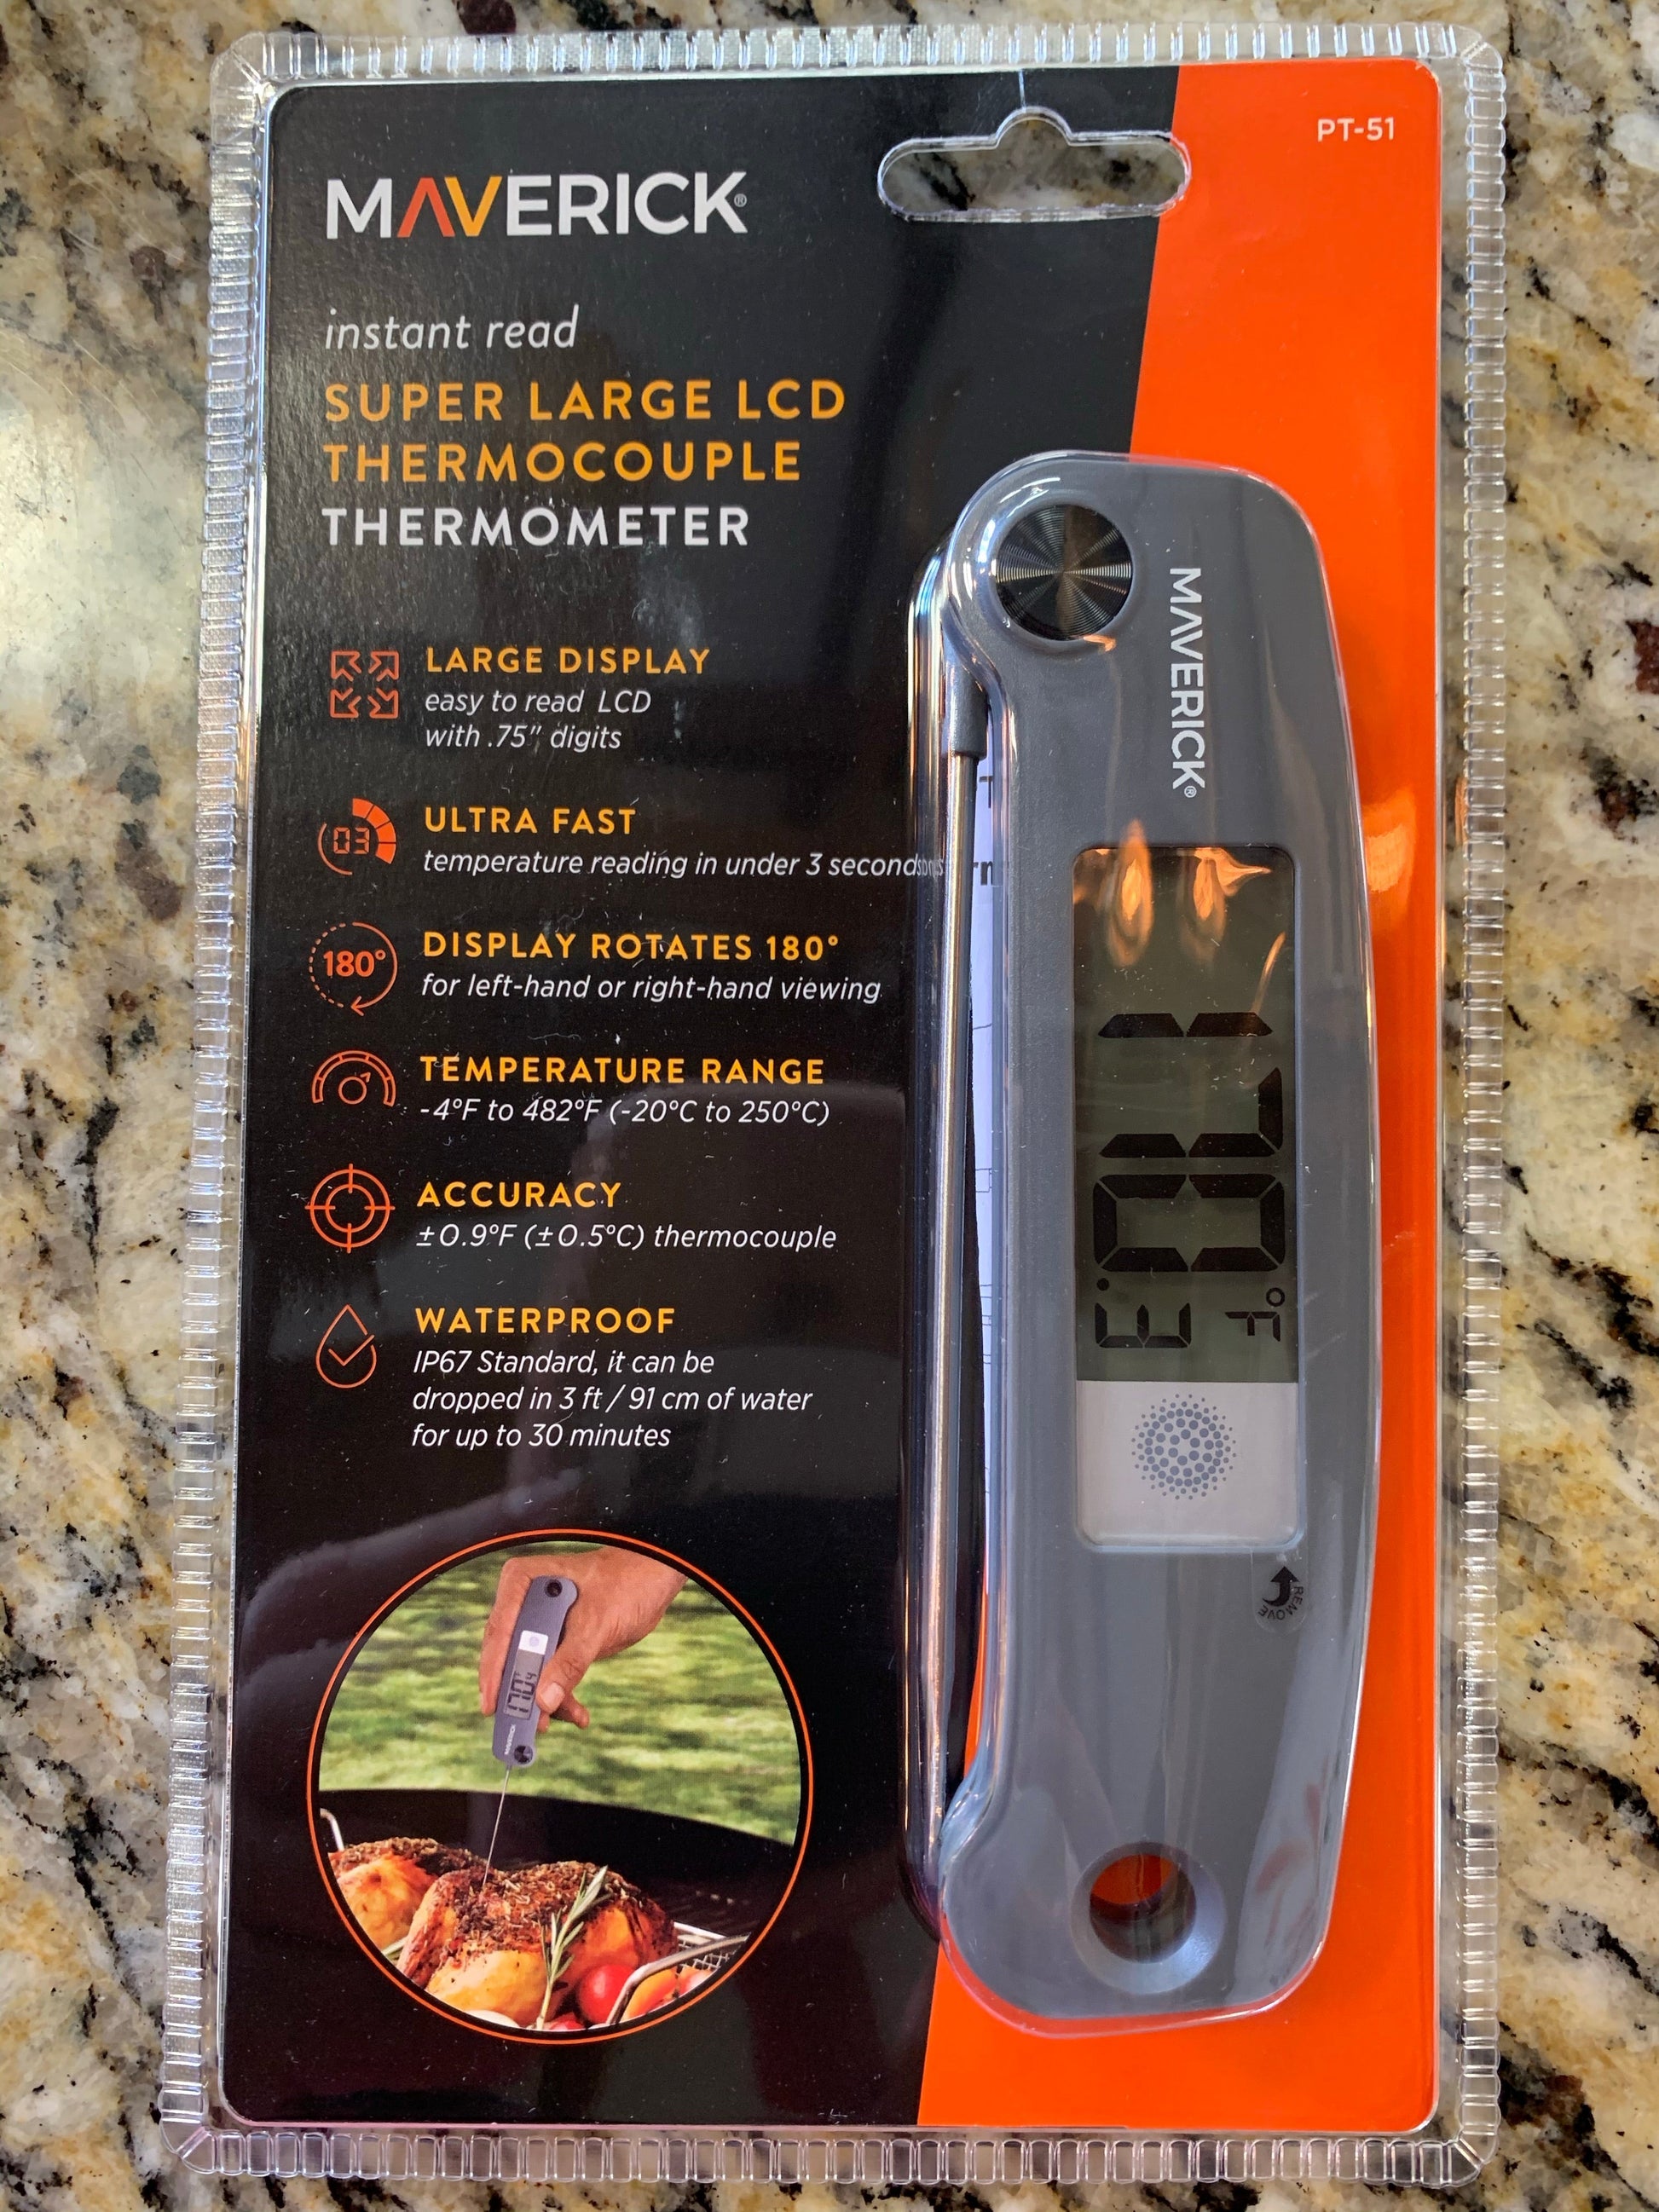 Maverick PT-51 instant read super large LCD thermocouple thermometer